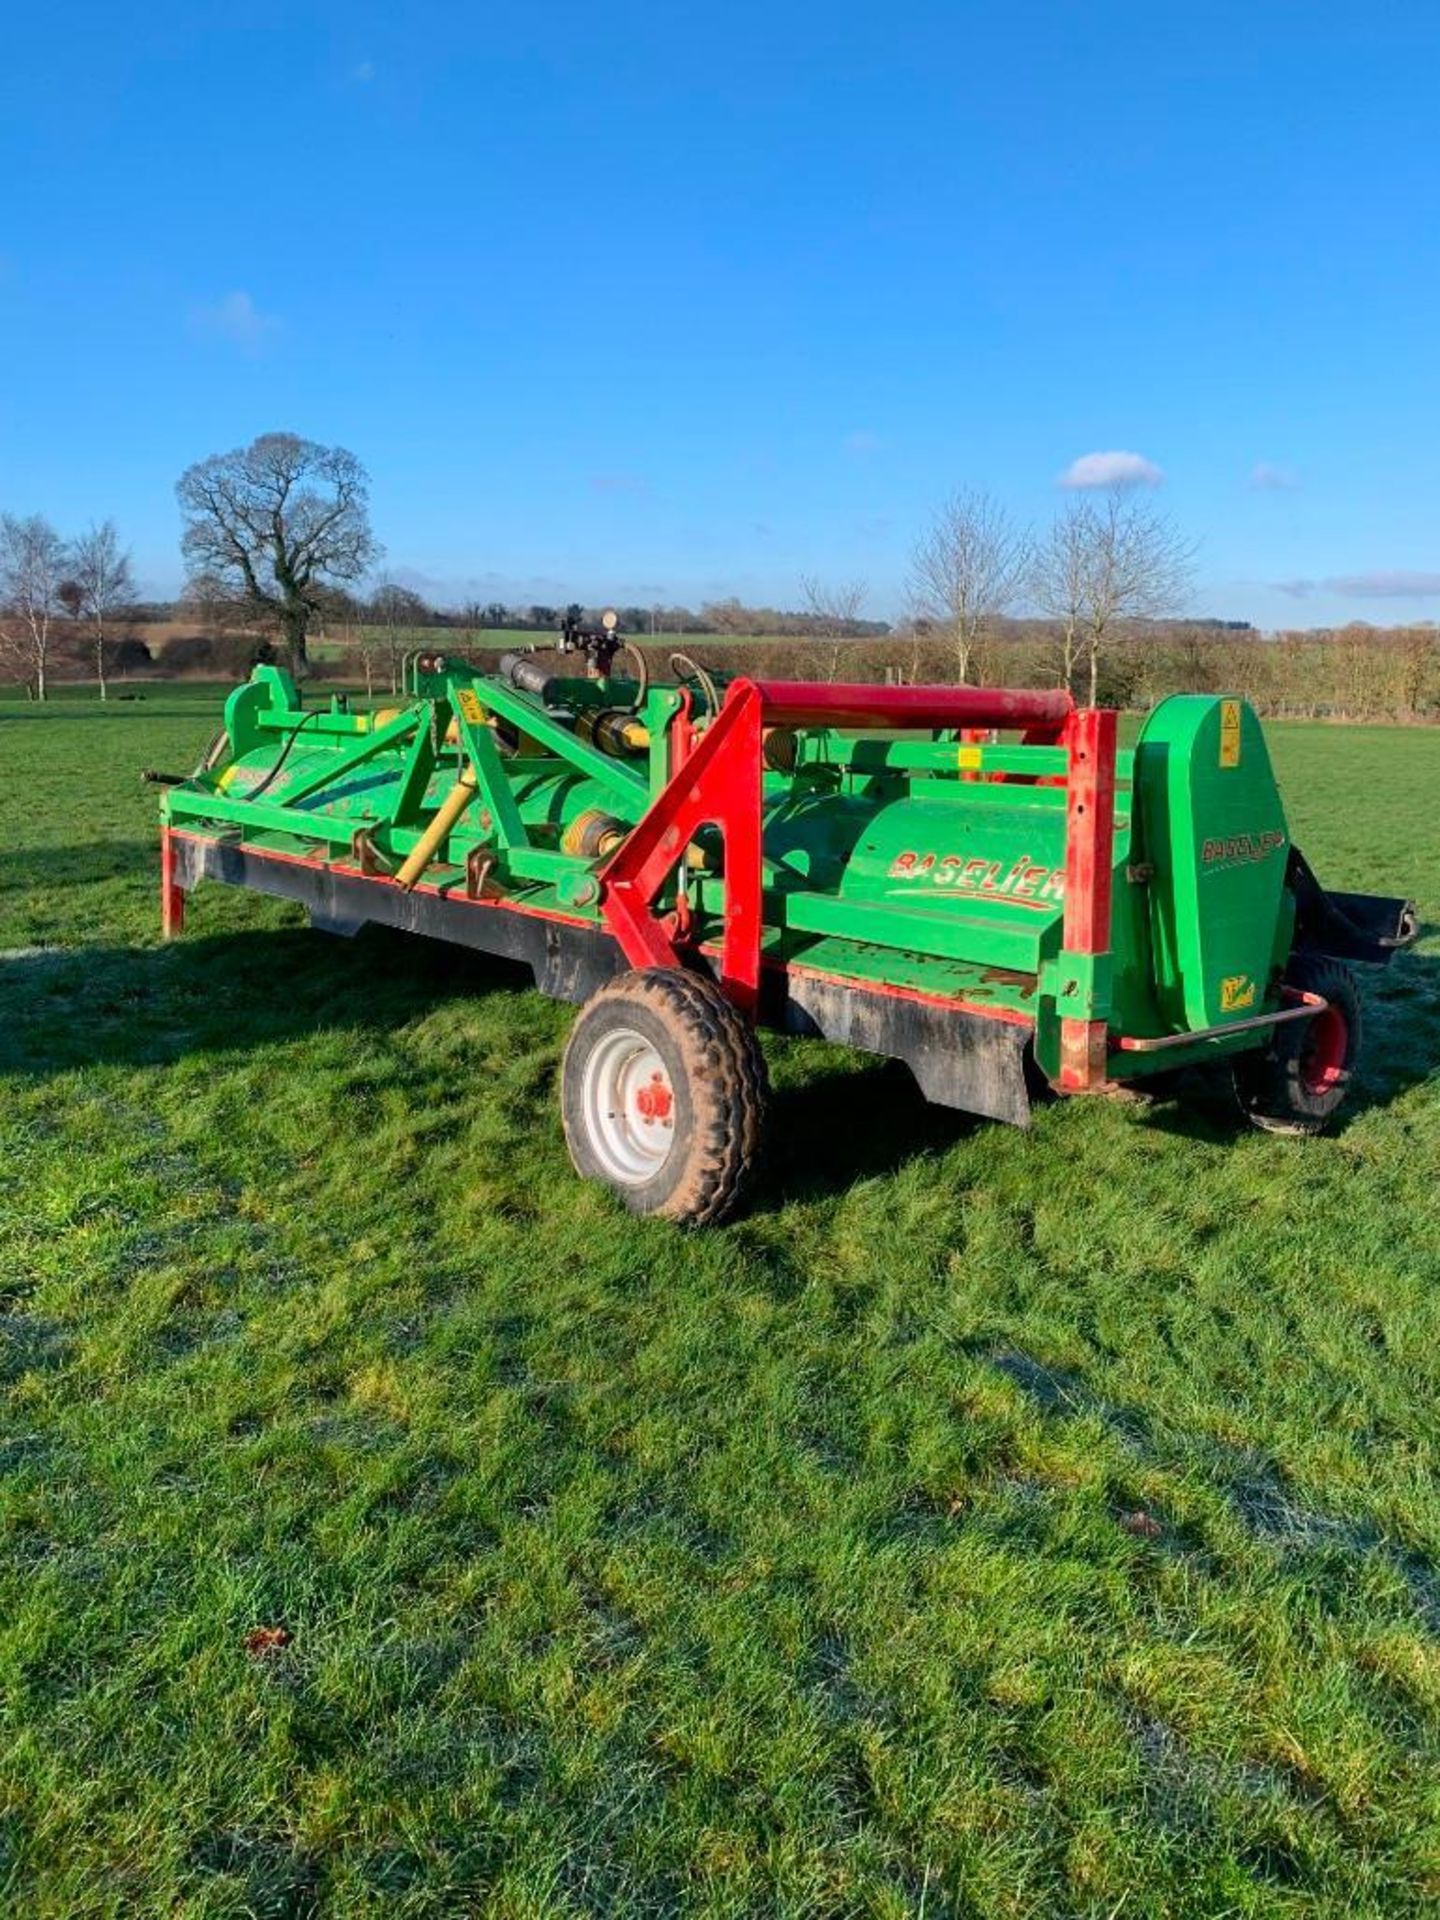 2020 Baselier 6LKB550 Topper, 6 Row / 3 Bed Topper, Fixed with End Towing Kit, c/w Farm Made Band Sp - Image 4 of 6